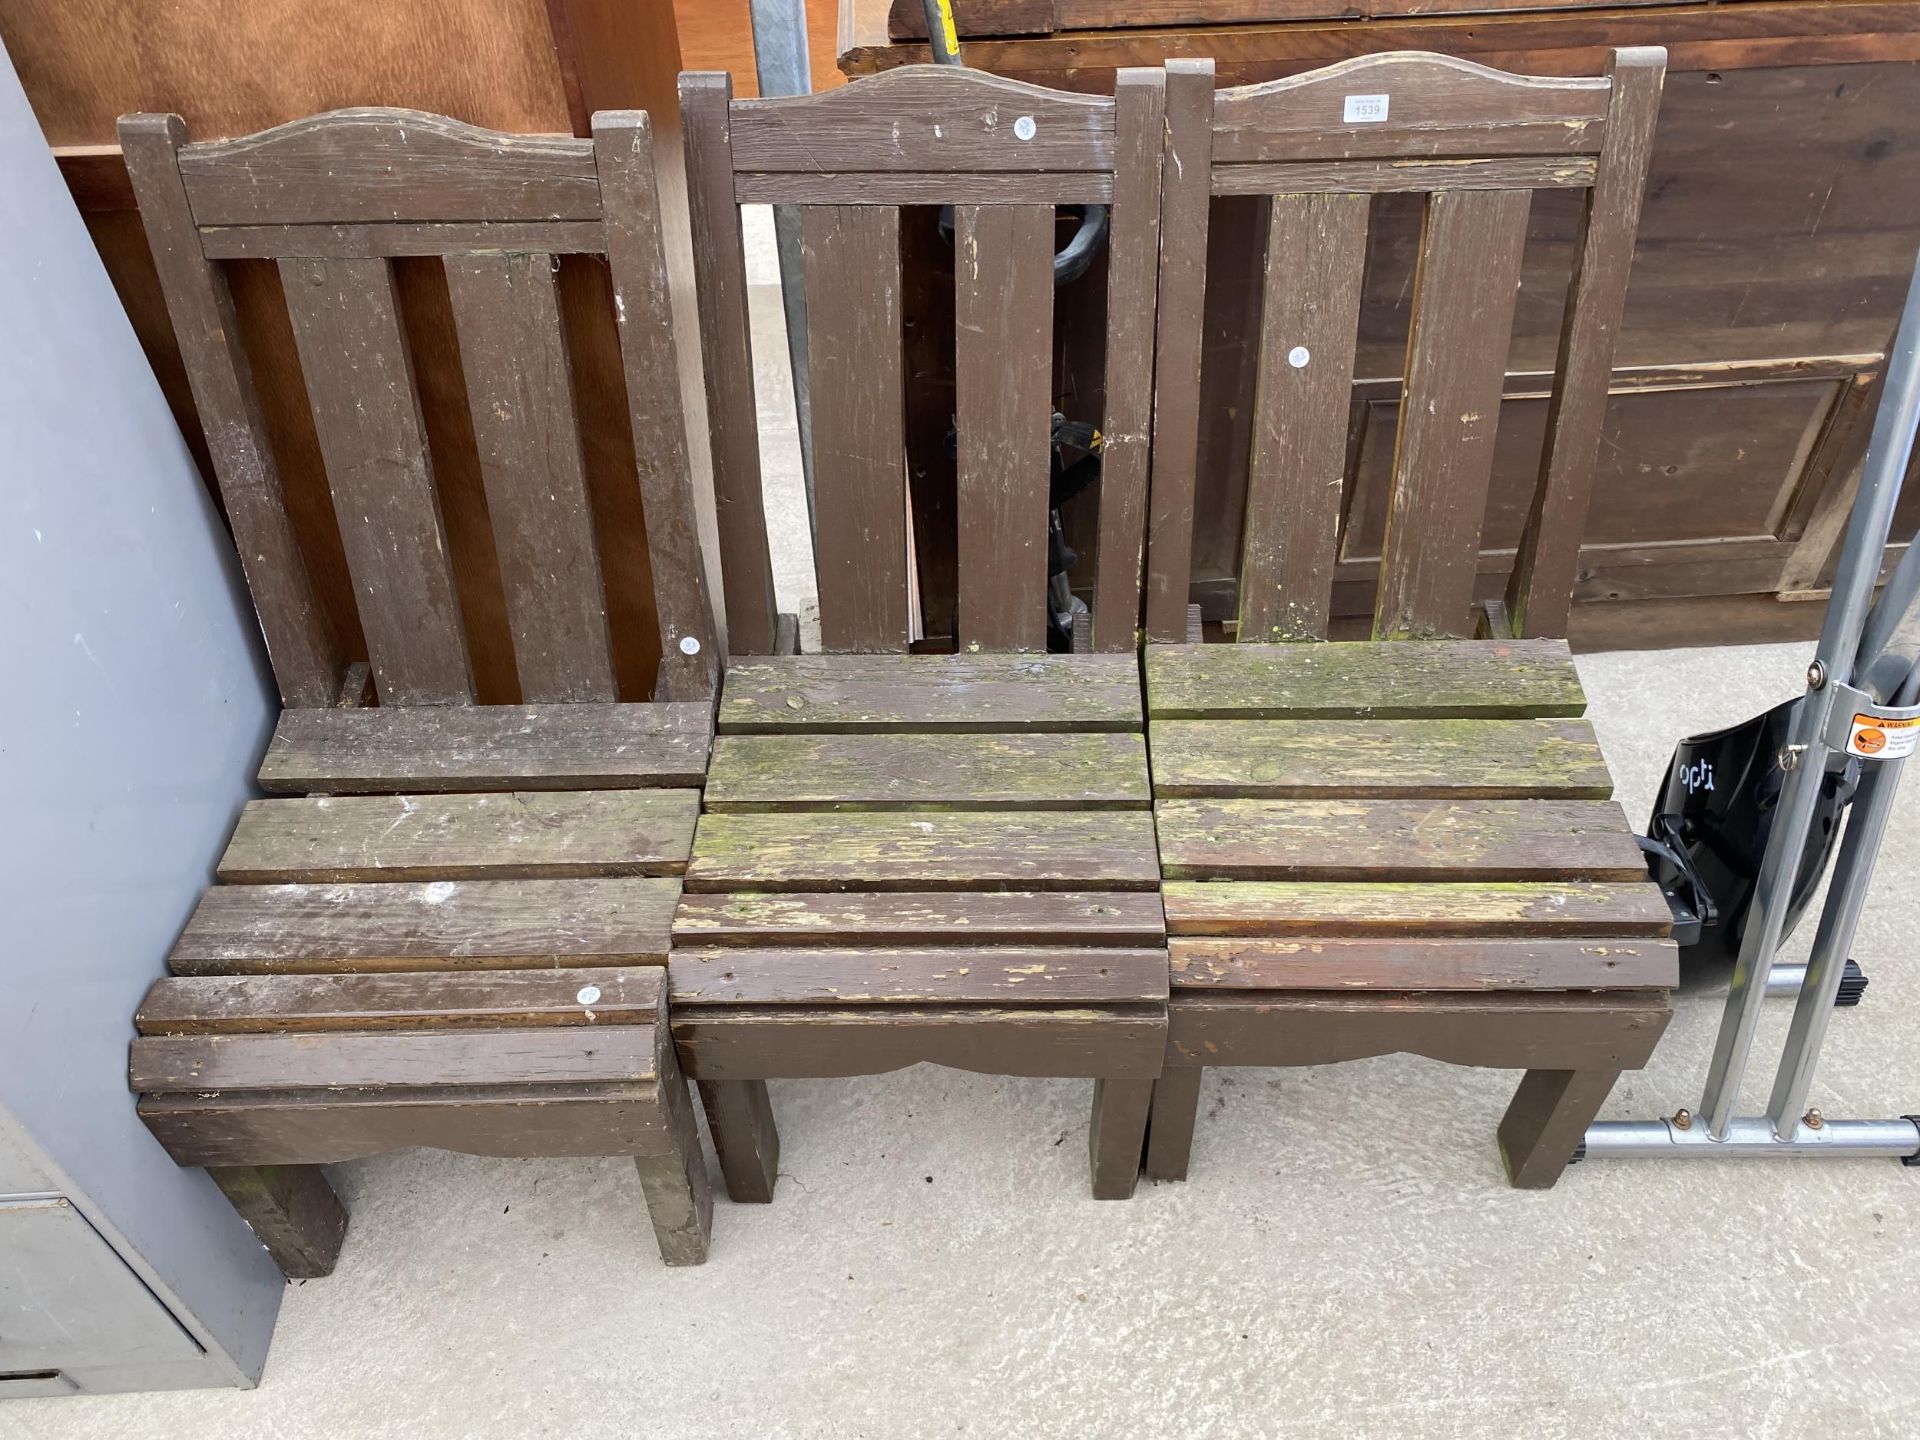 A SET OF THREE WOODEN SLATTED GARDEN CHAIRS